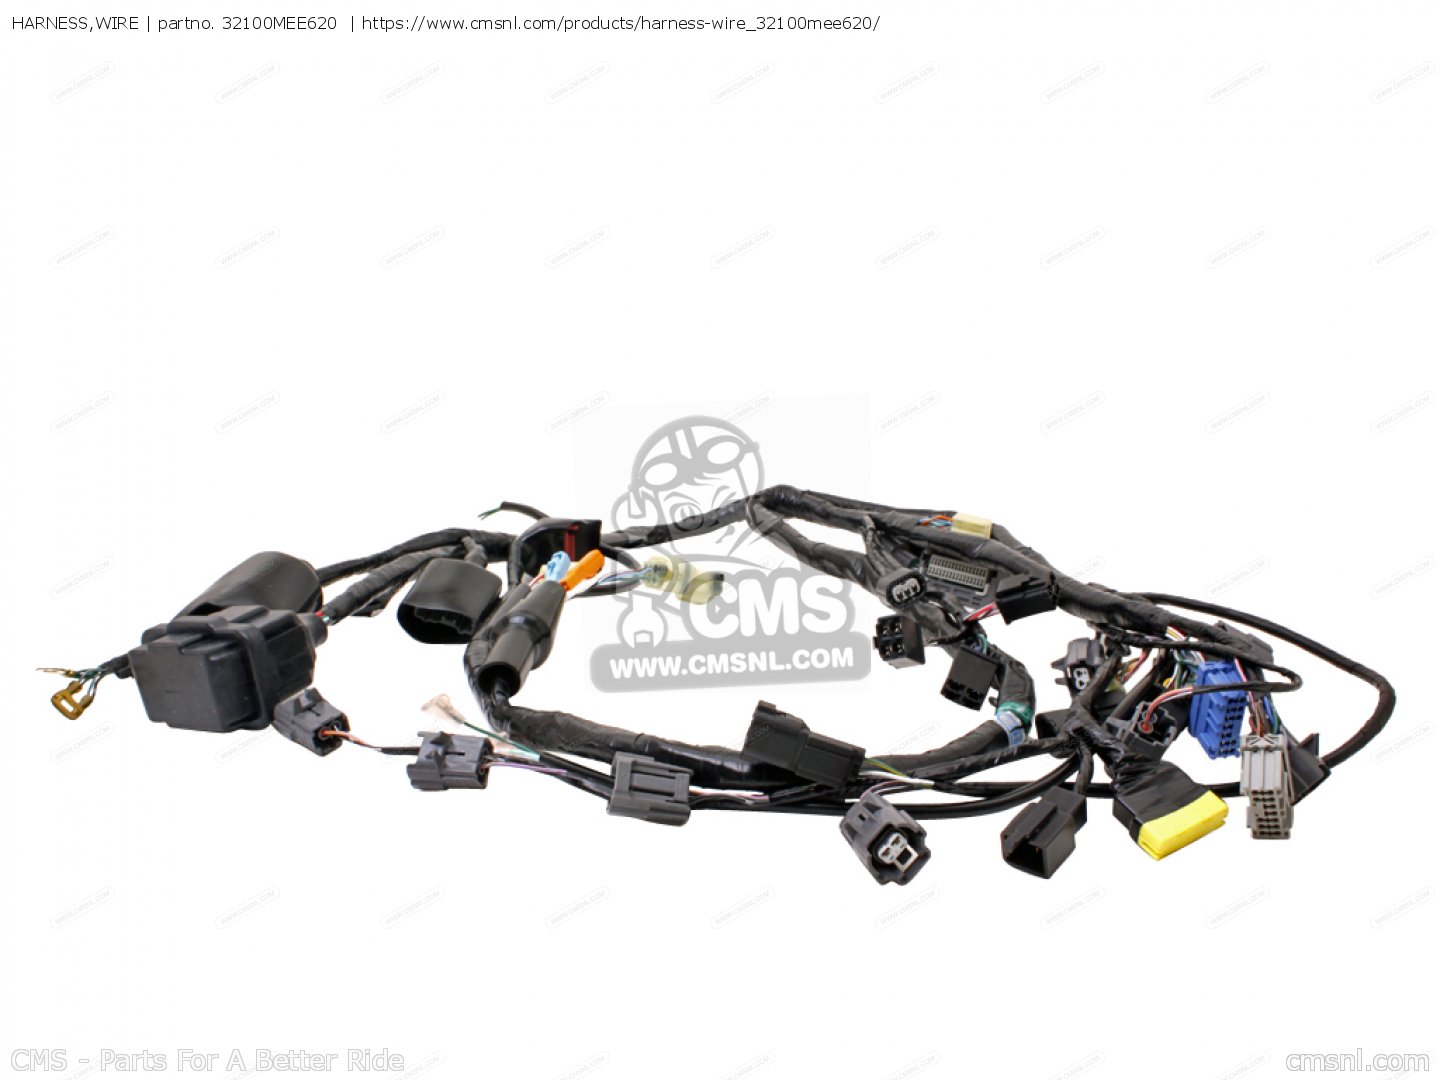 32100MEE620: Harness,wire Honda - buy the 32100-MEE-620 at CMSNL